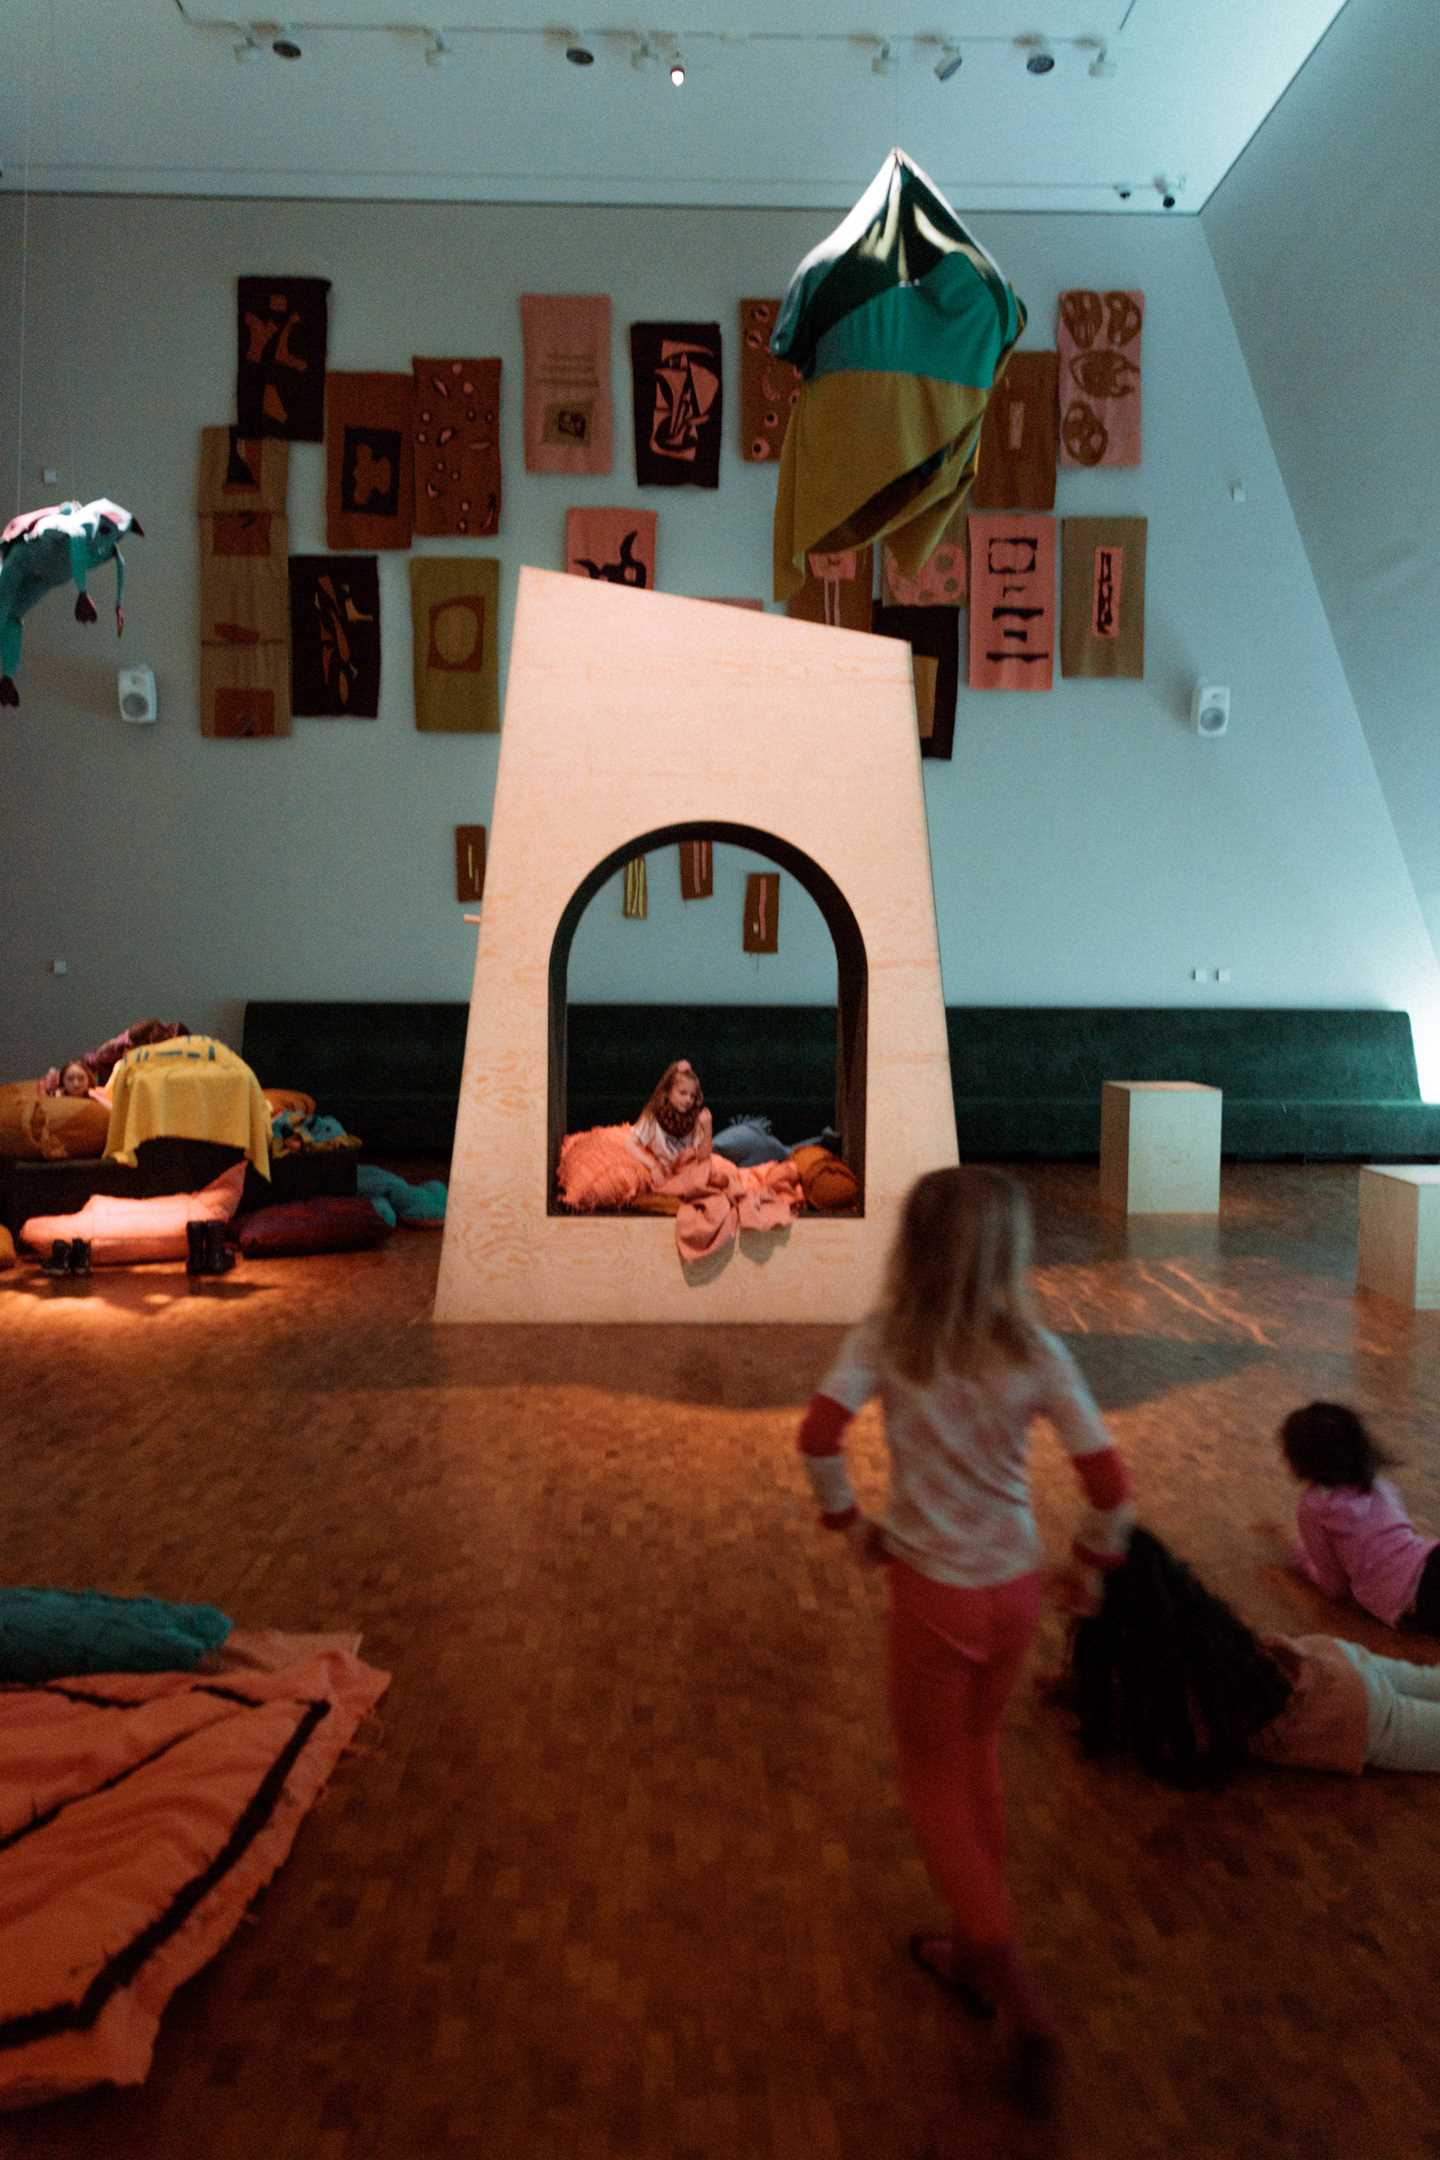 Kids playing in The Chamber of Chaos, a wonderful world of portals, colourful pillows and textile figures, surrounded by magical lighting 